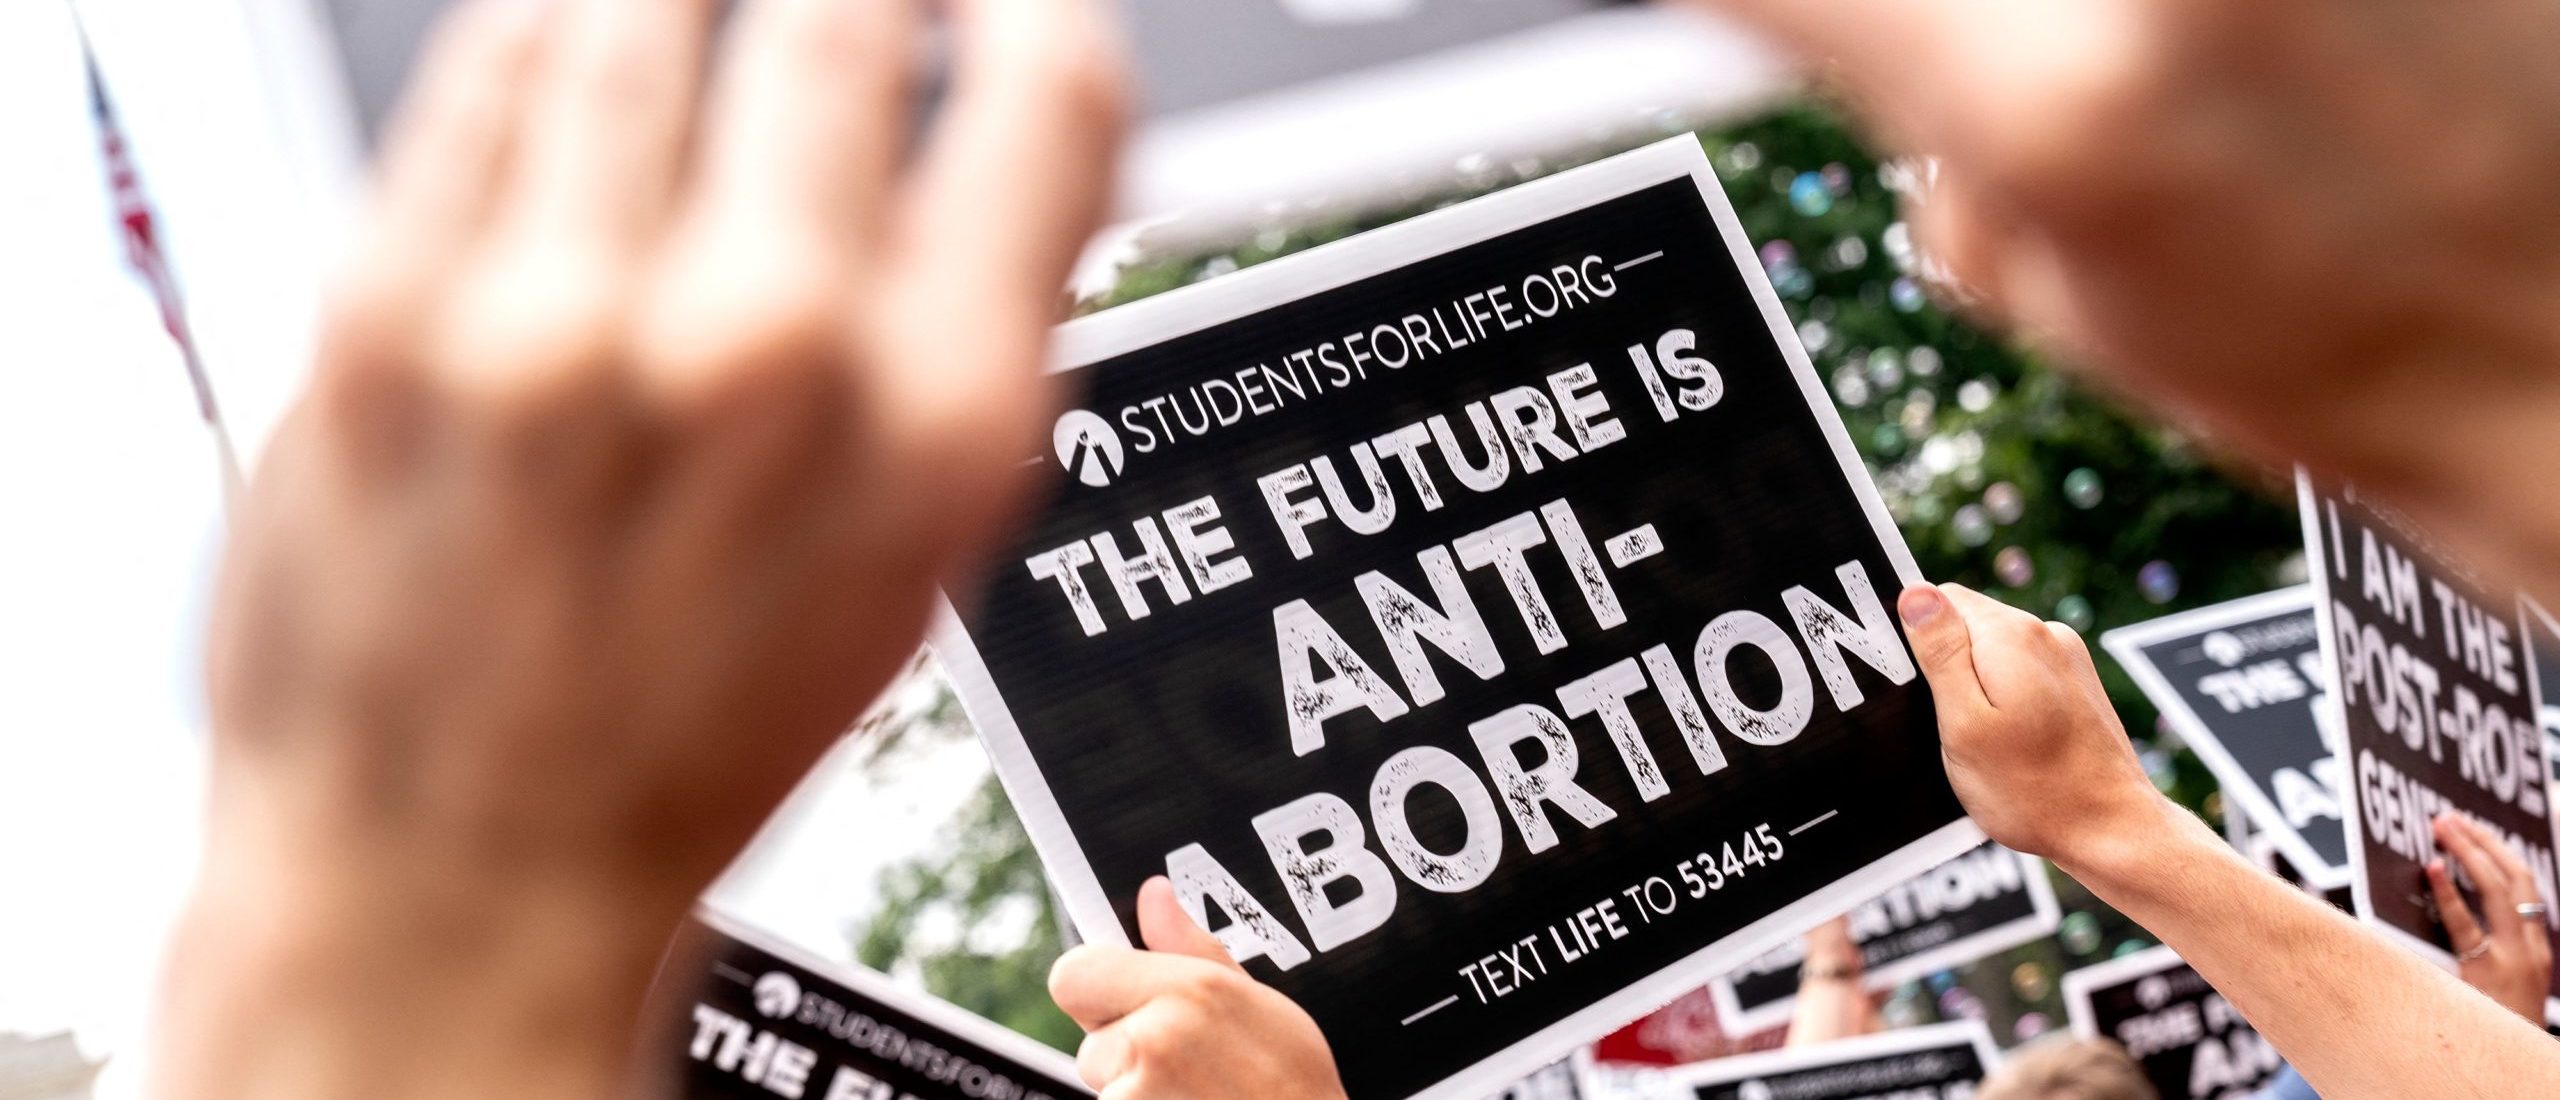 Anit-abortion activists hold signs outside the US Supreme Court in Washington, DC, on June 24, 2022.